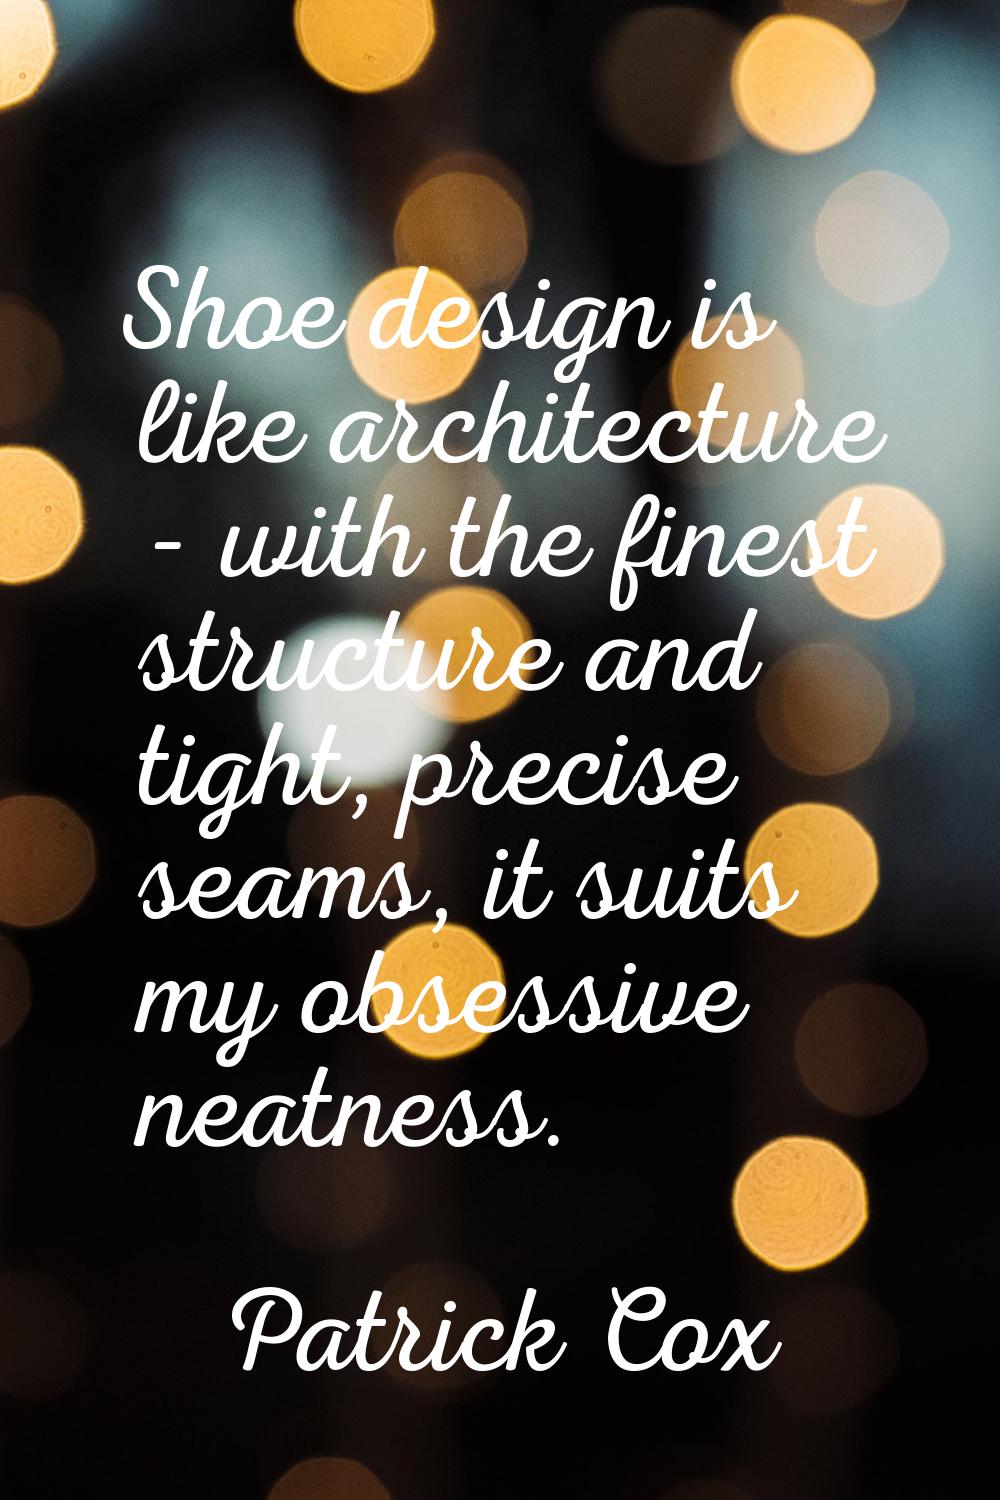 Shoe design is like architecture - with the finest structure and tight, precise seams, it suits my 